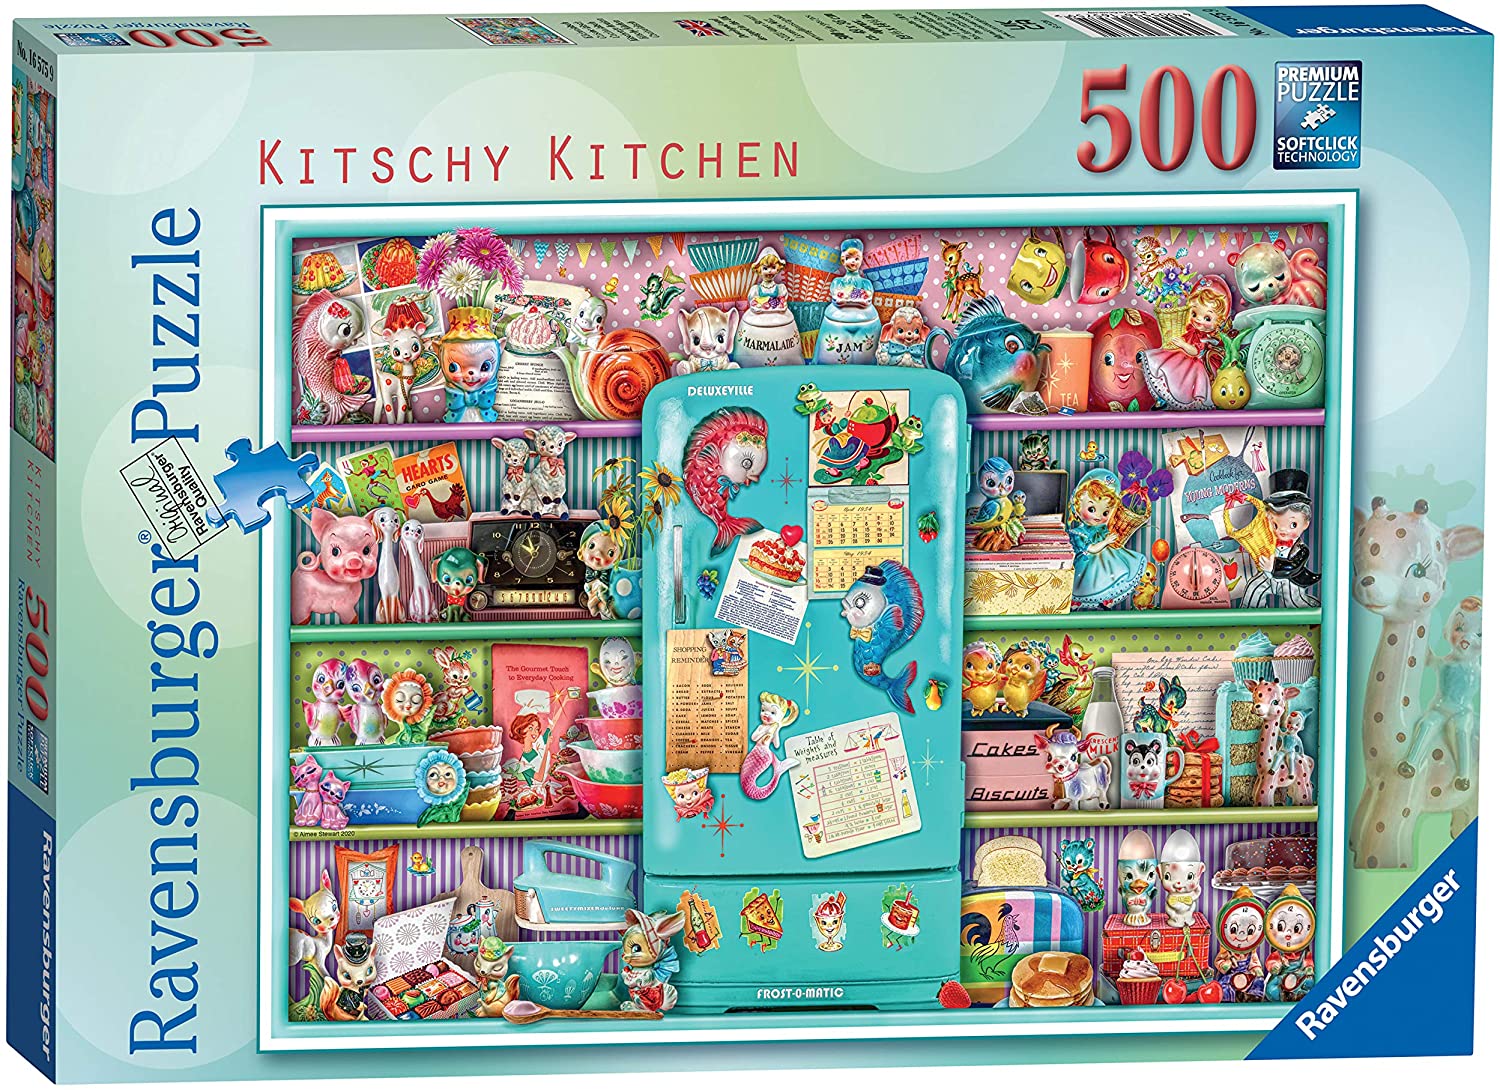 THE SWEET SHOP Brand New Ravensburger 500 Piece Jigsaw Puzzle 